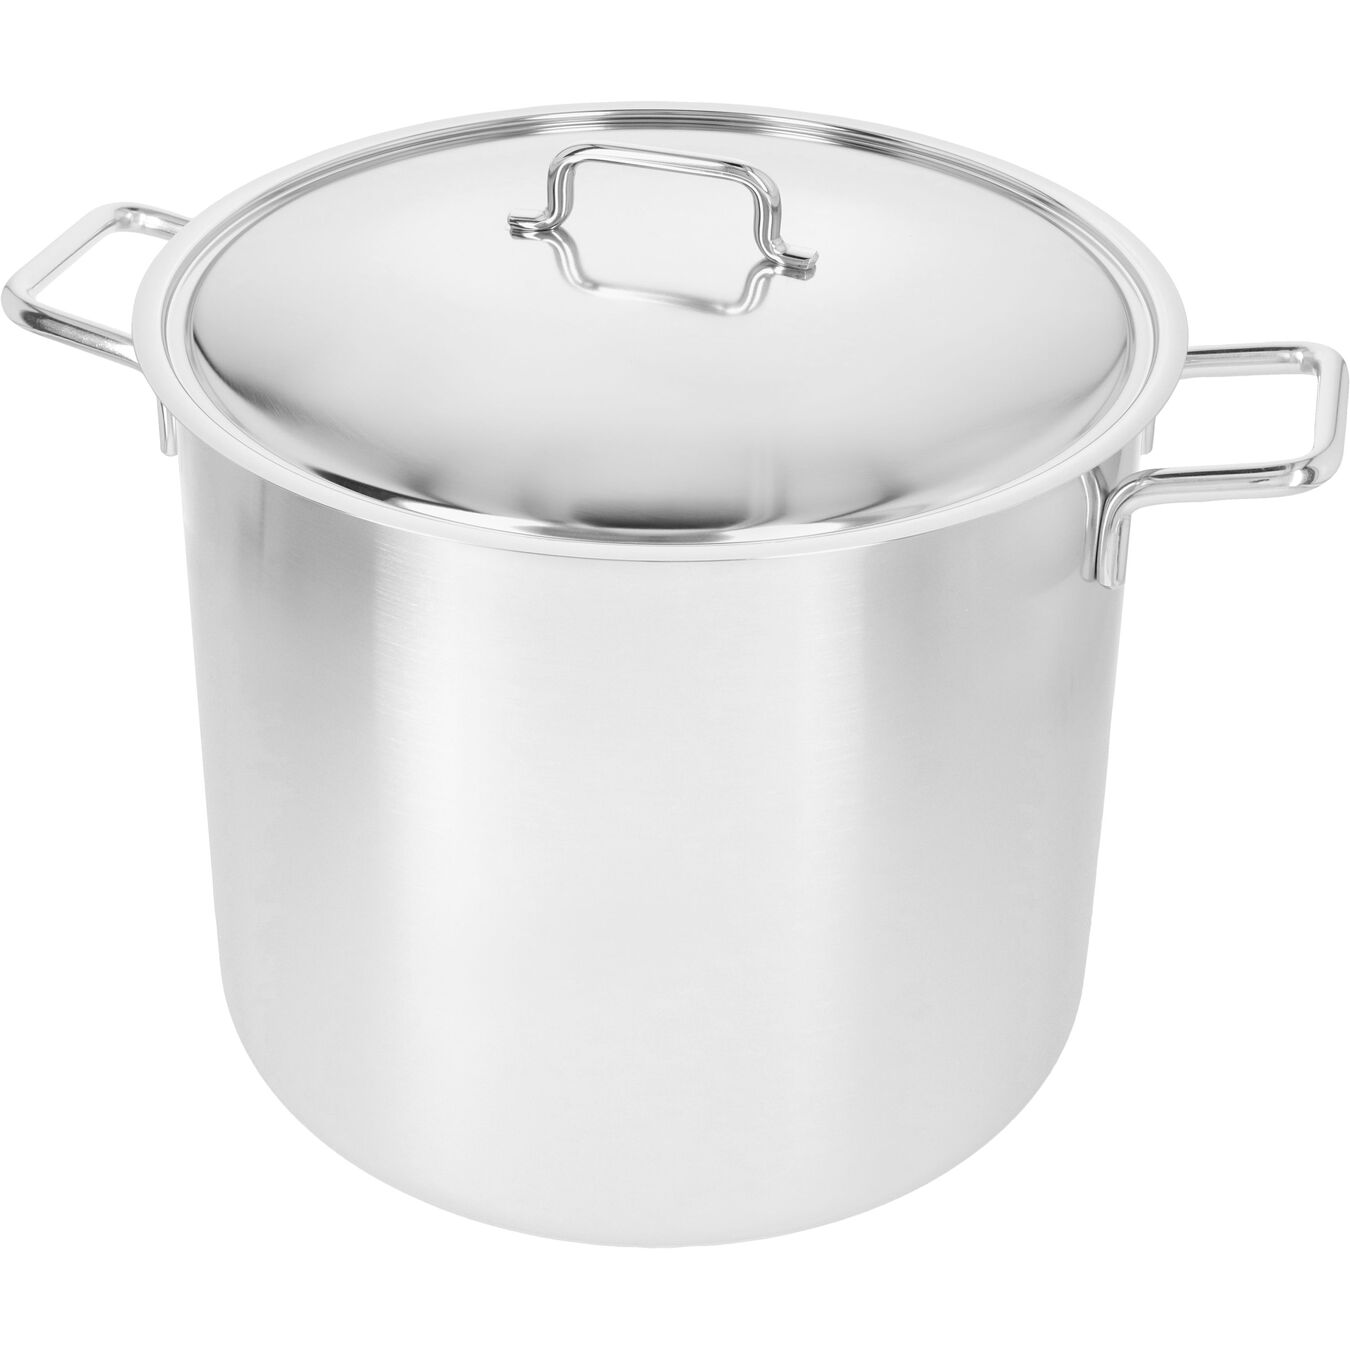 36 cm 18/10 Stainless Steel Stock pot with lid silver,,large 4